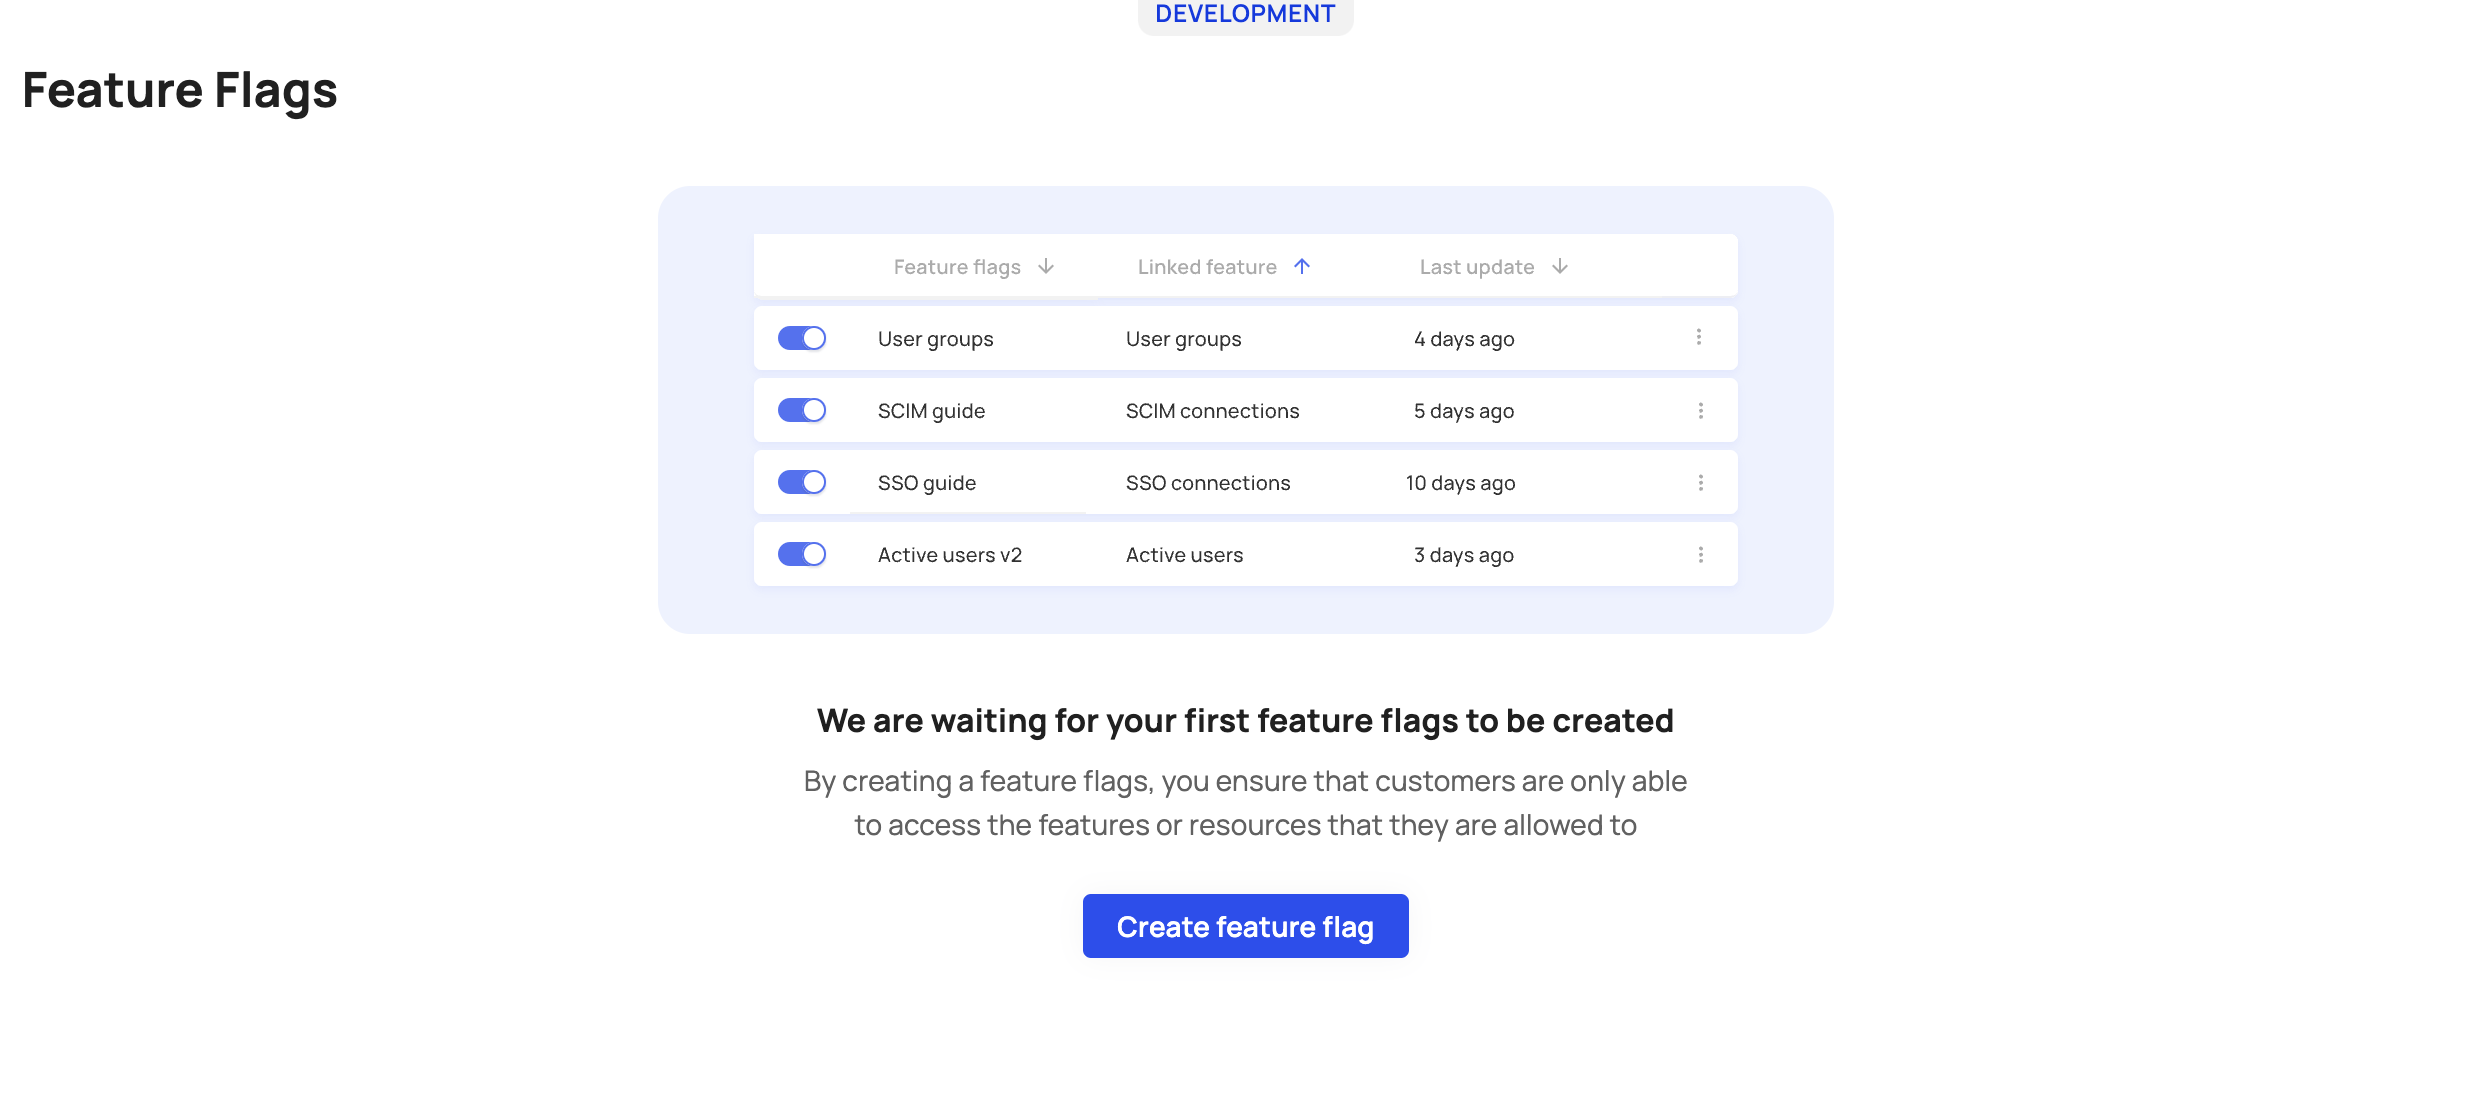 Create a new feature flag

